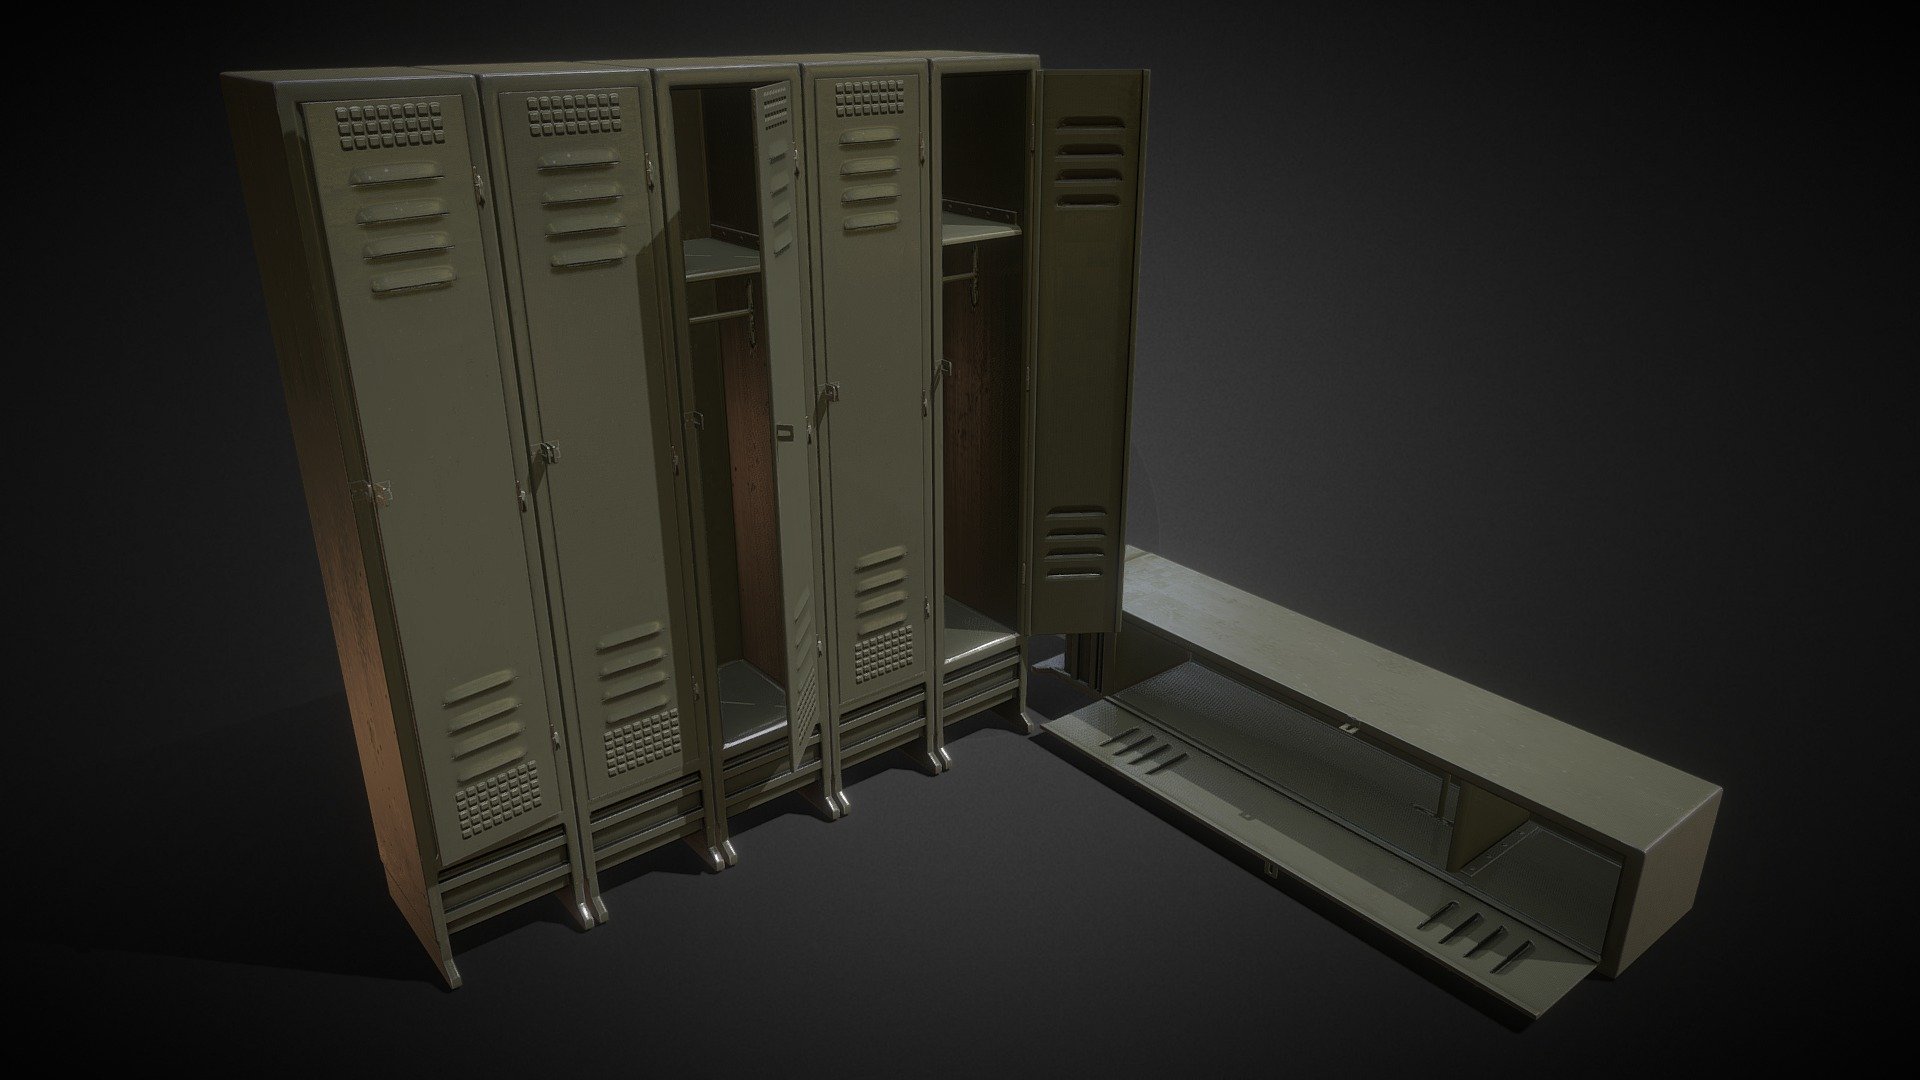 -----------------------------------------3D locker model in FBX format-------------------------------------

-----------------------------------------textures in 2048X2048----------------------------------------------

----------------------------------------- inside the .rar file contains the models, as well as an example of the images, as well as the individual model in FBX format and their respective textures 2048x2048-------------

----------the locker comes with its separate door so you can close or open it according to your taste or animation----------- - LOCKER - Buy Royalty Free 3D model by highraion 3d model